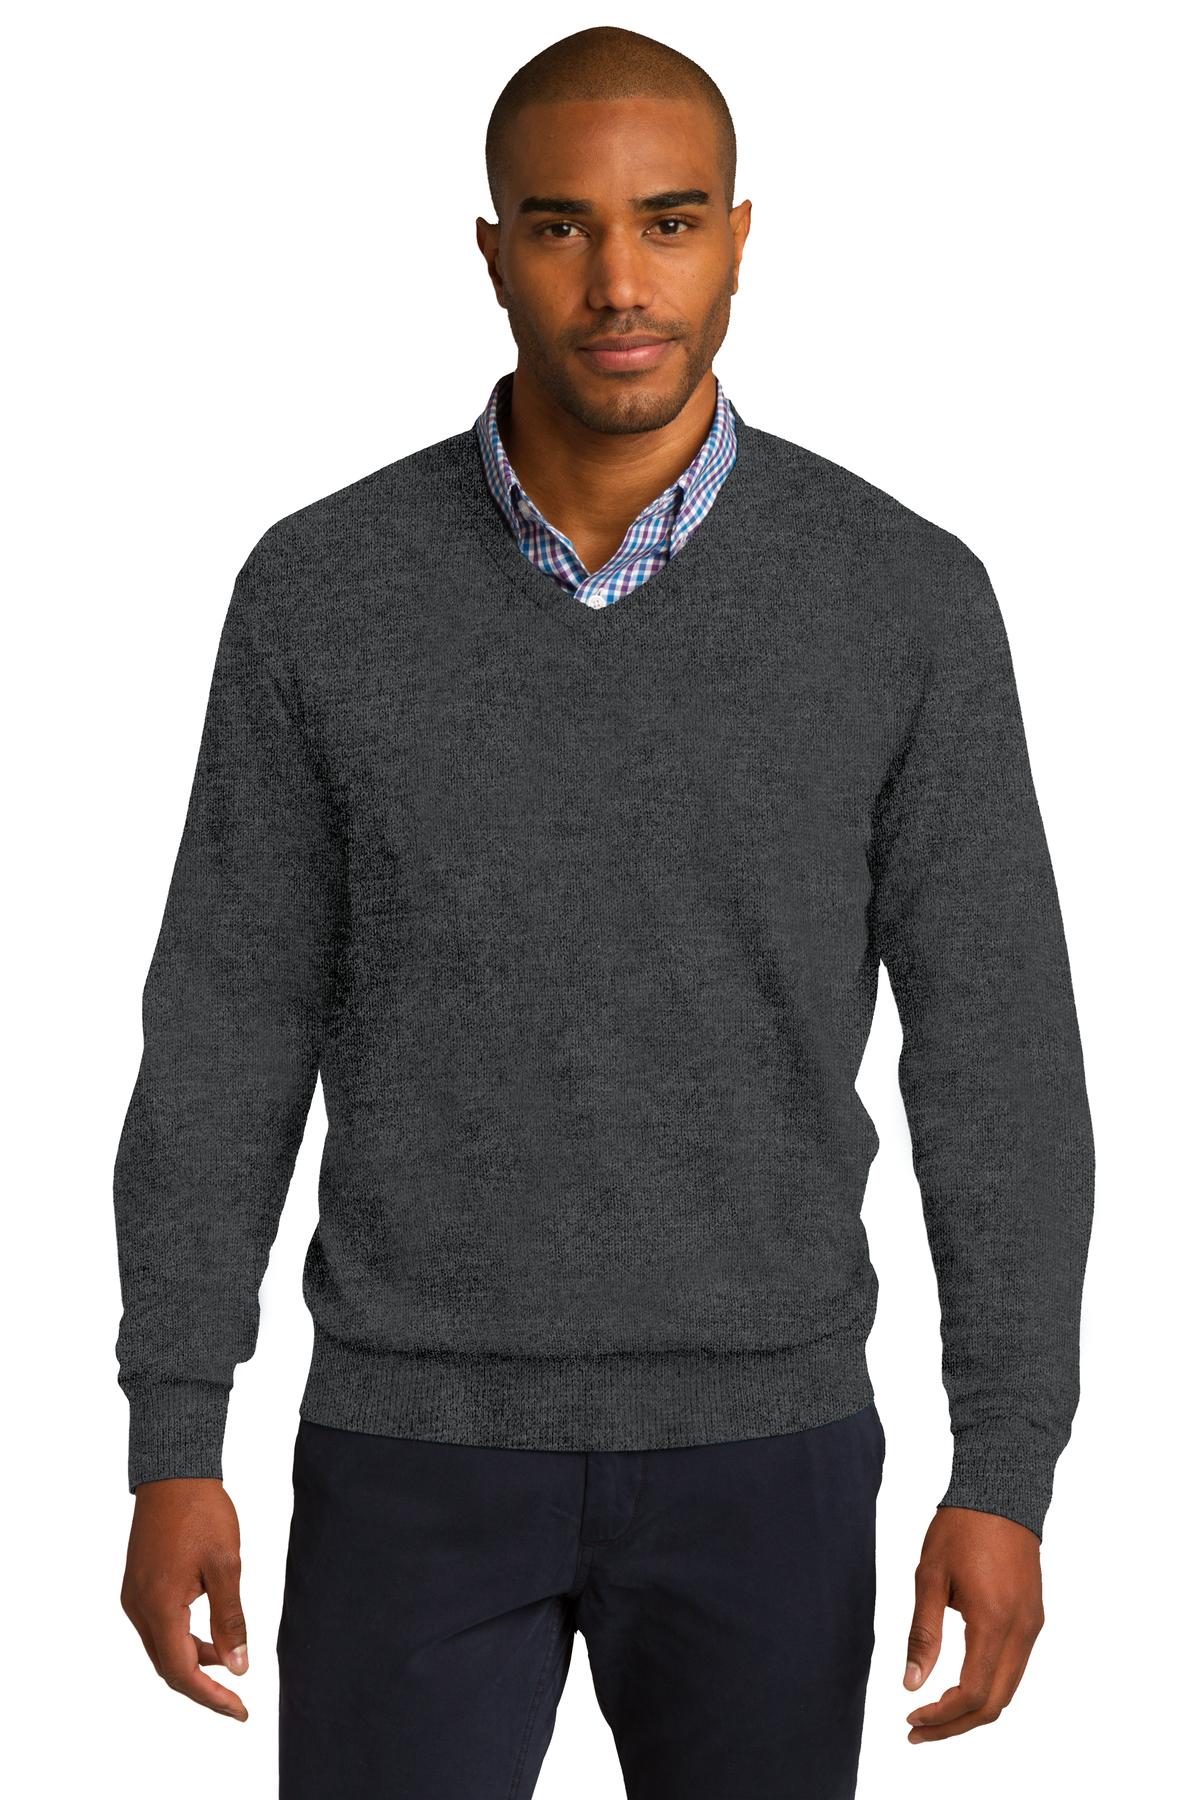 Polos/Knits Charcoal Heather Port Authority